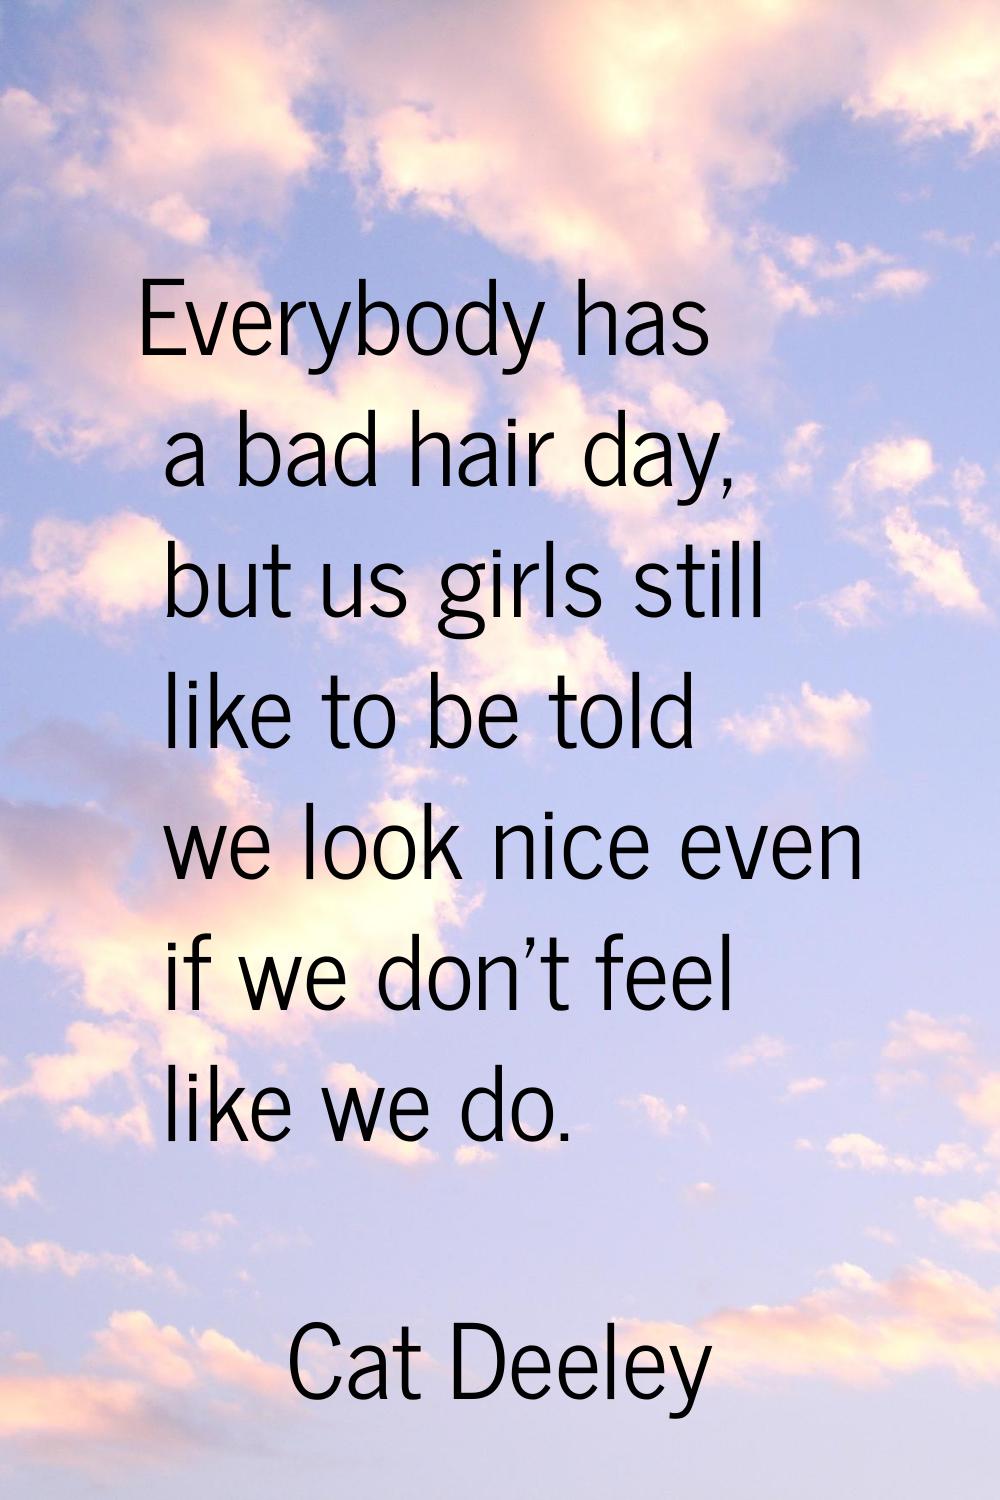 Everybody has a bad hair day, but us girls still like to be told we look nice even if we don't feel